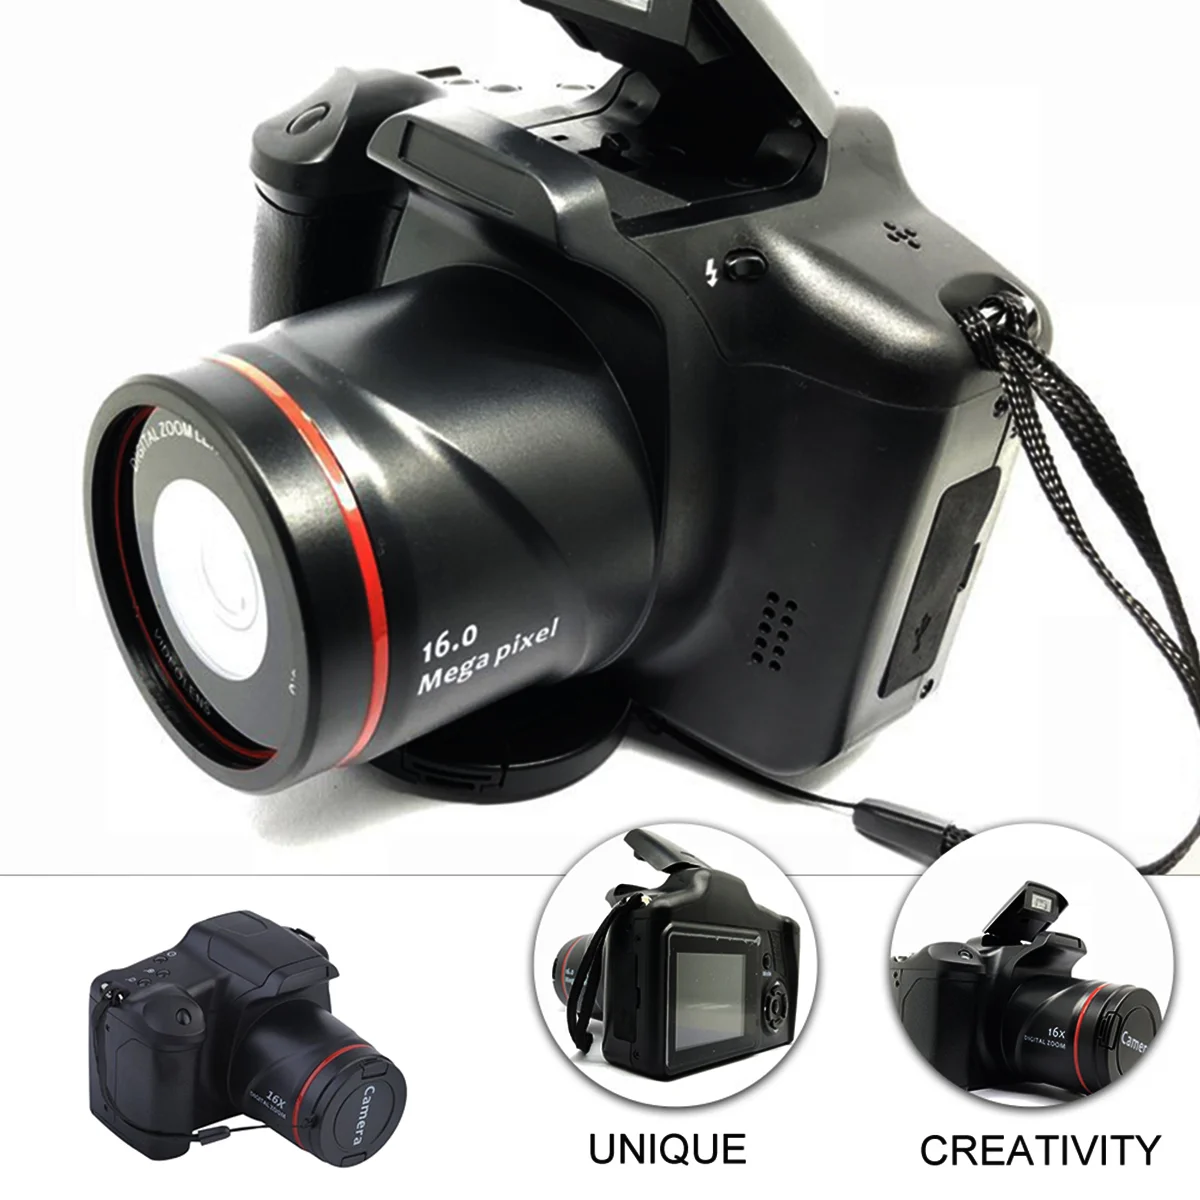 

Camera Digital Video Photography Camcorder Cameras Zoom 16X 4K Mirrorless Rechargeable Telephoto Polrod Polorod Cemmo Point